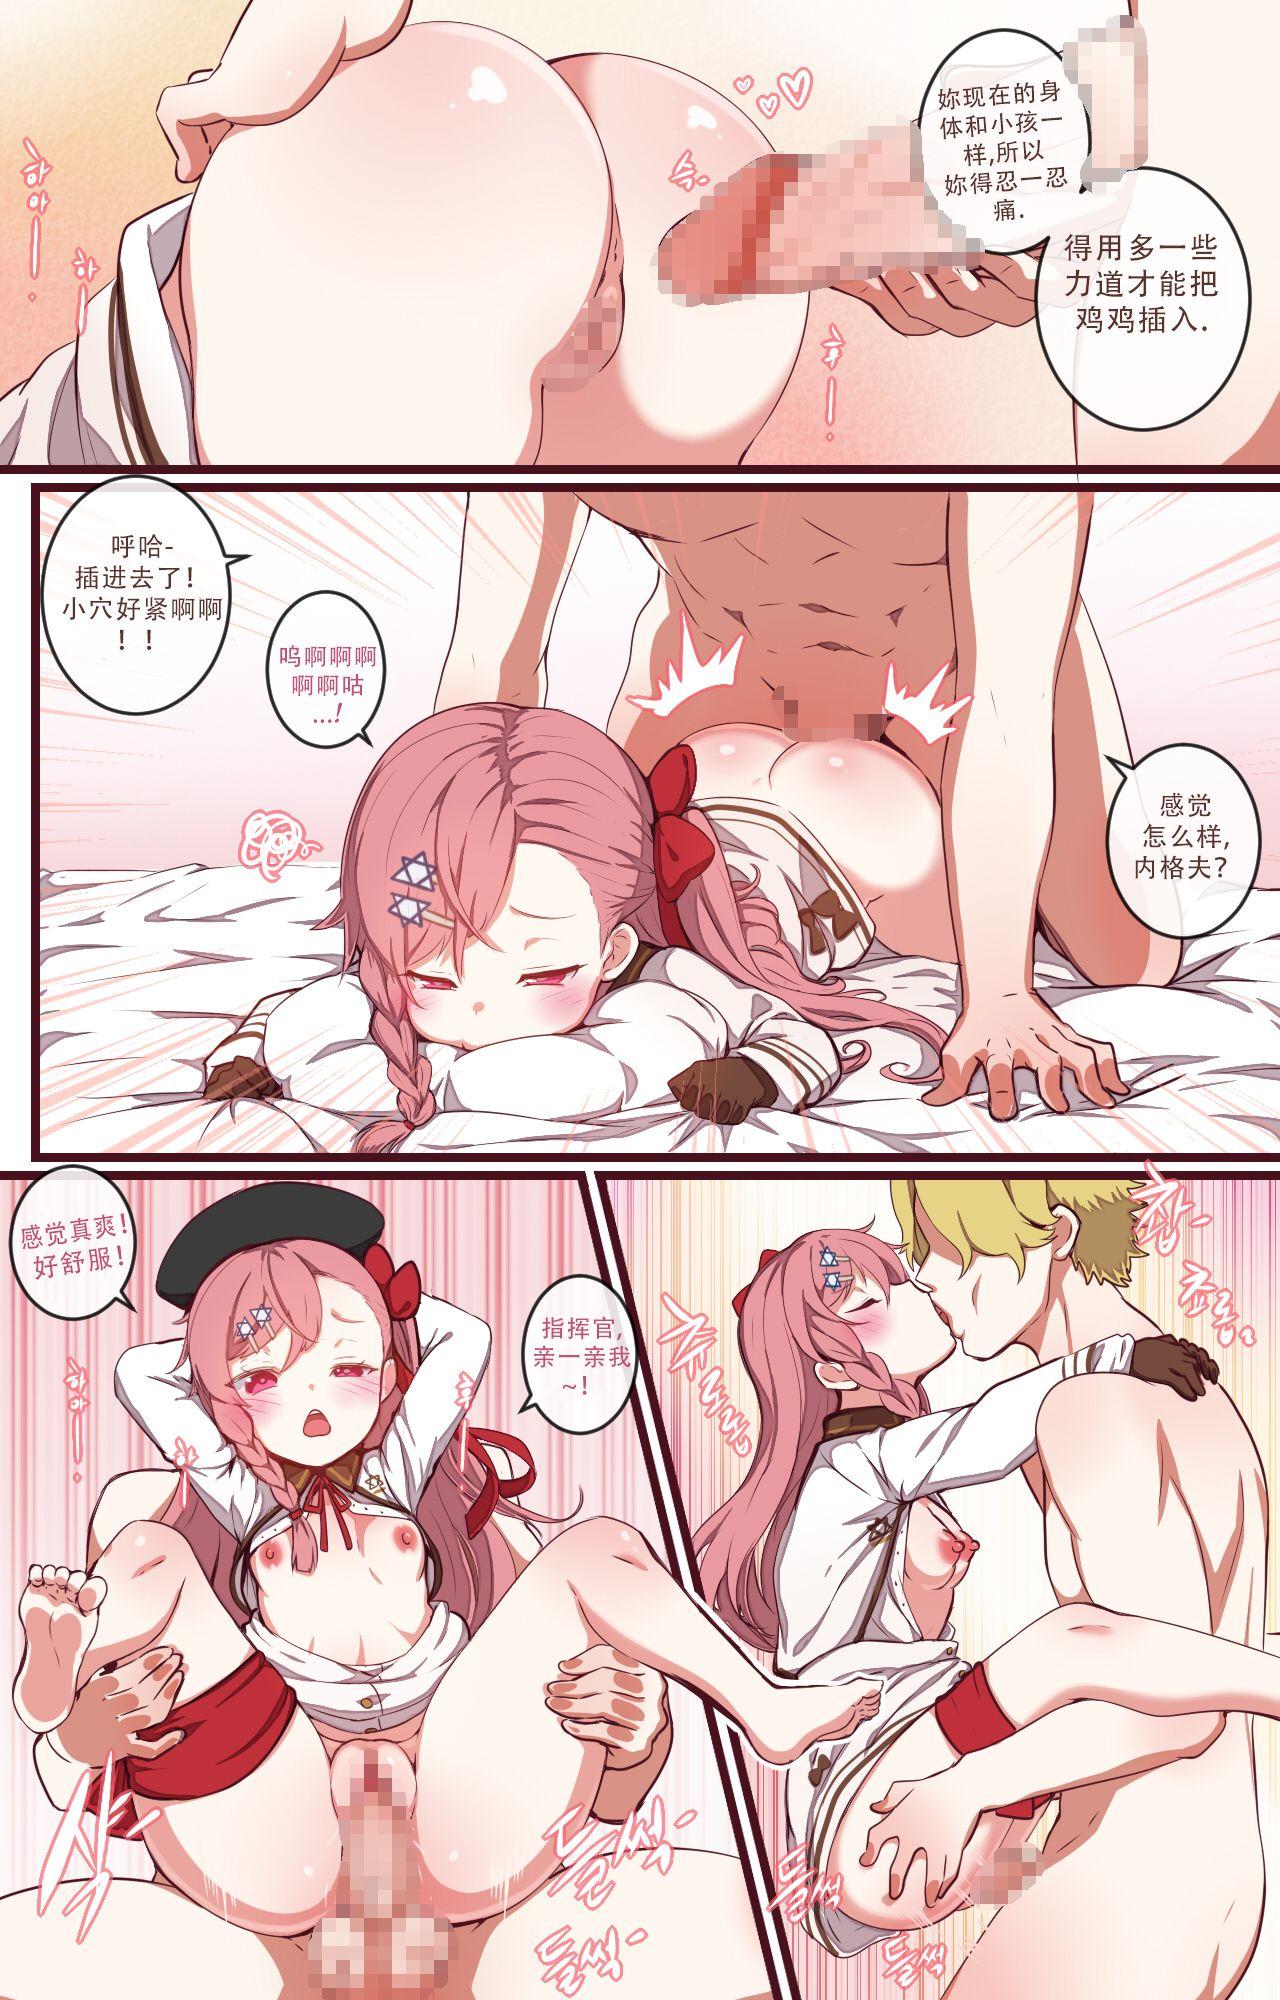 Freaky [yun-uyeon (ooyun)] How to use dolls 03 (Girls Frontline) [Chinese]【火狸翻译】 - Girls frontline Spoon - Page 12